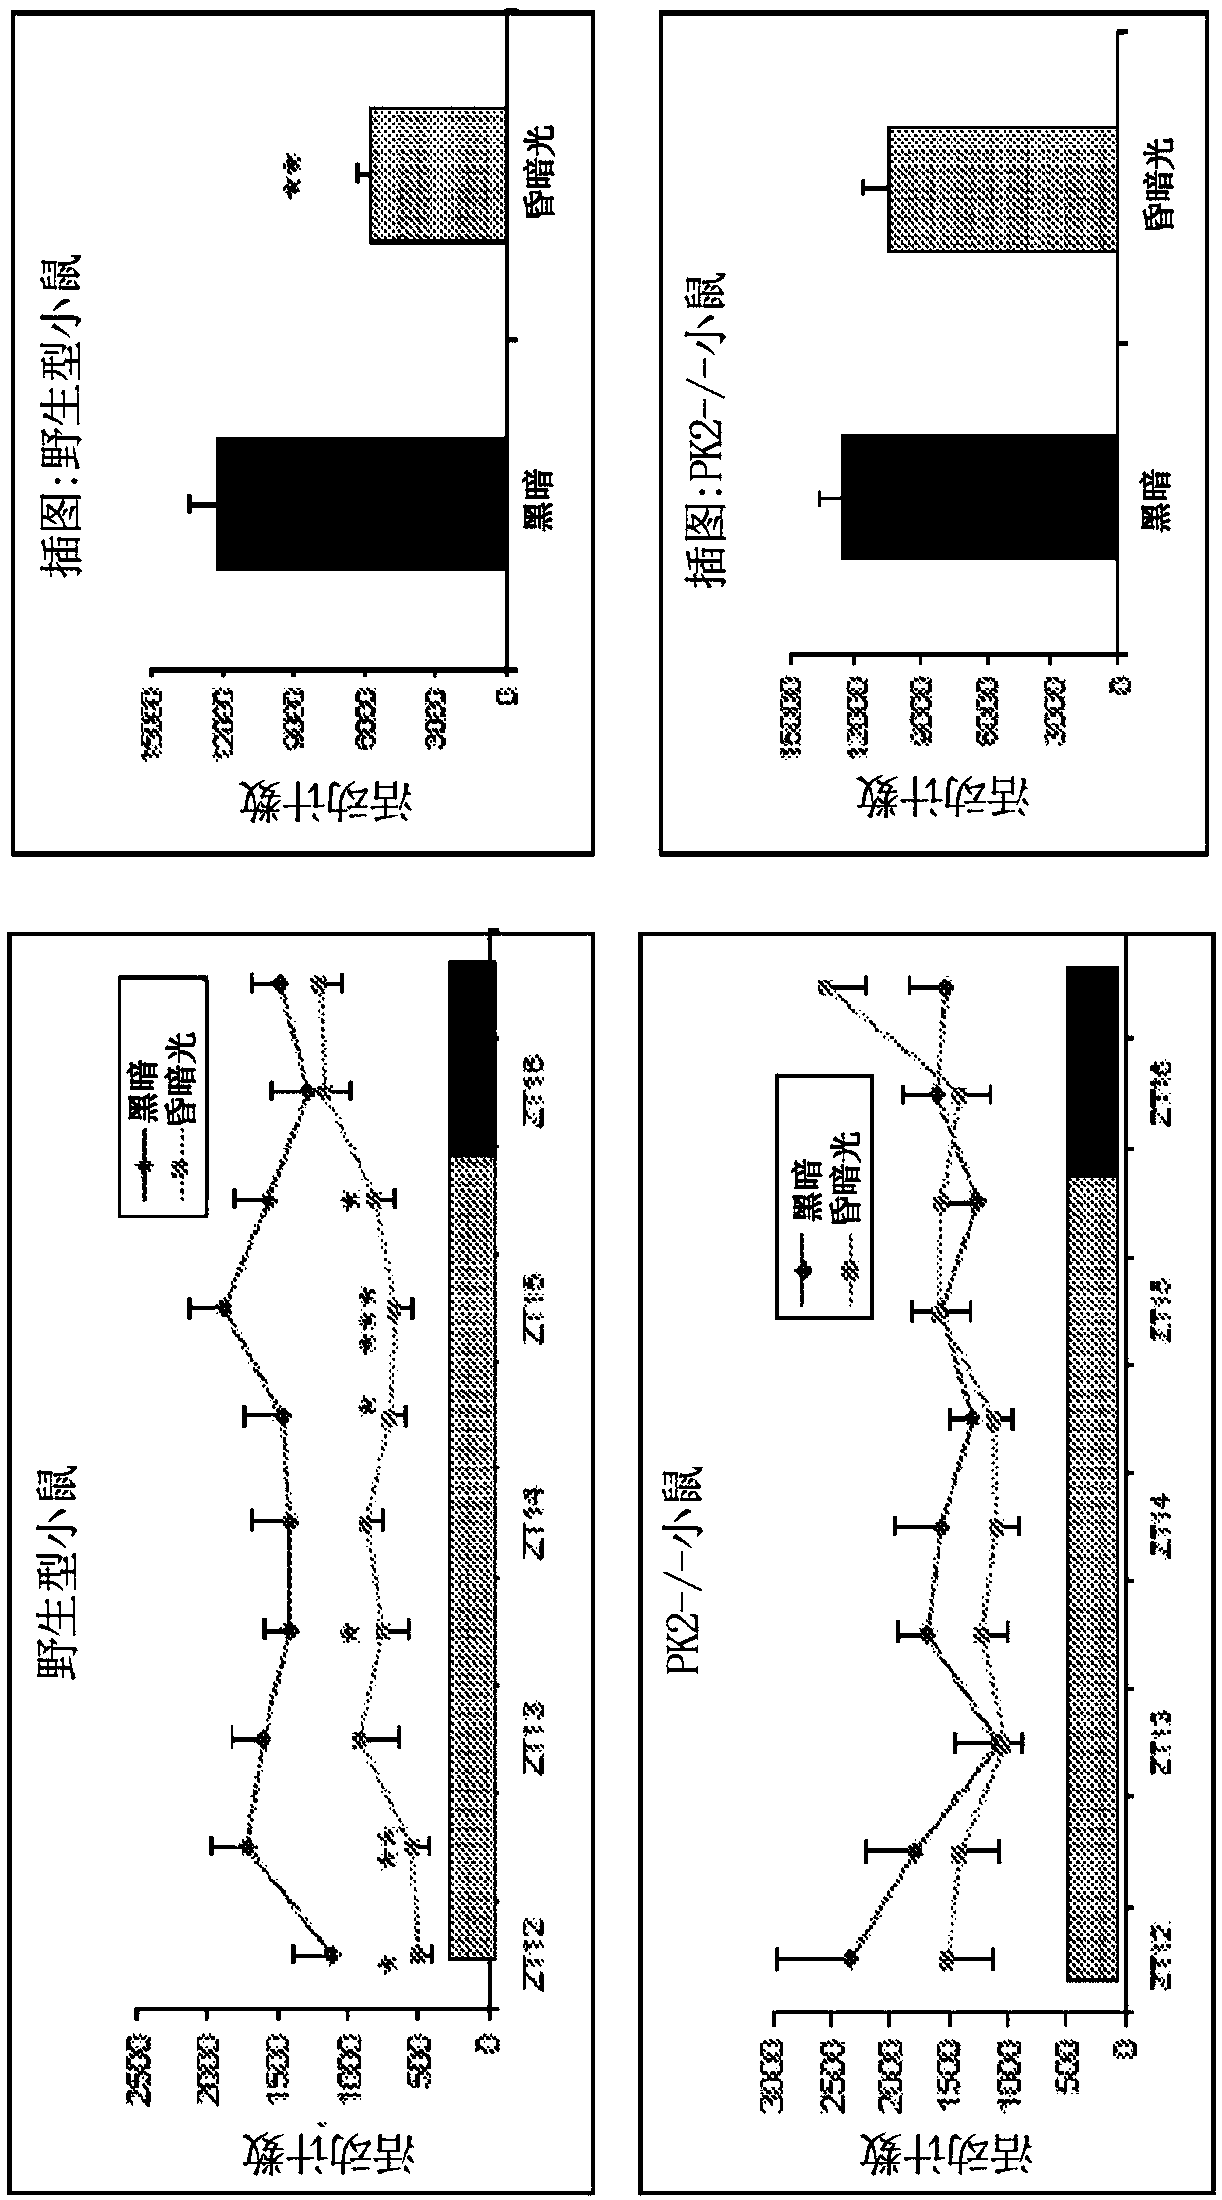 Compositions and methods for treating disorders of circadian and diurnal rhythms using prokineticin 2 agonists and antagonists